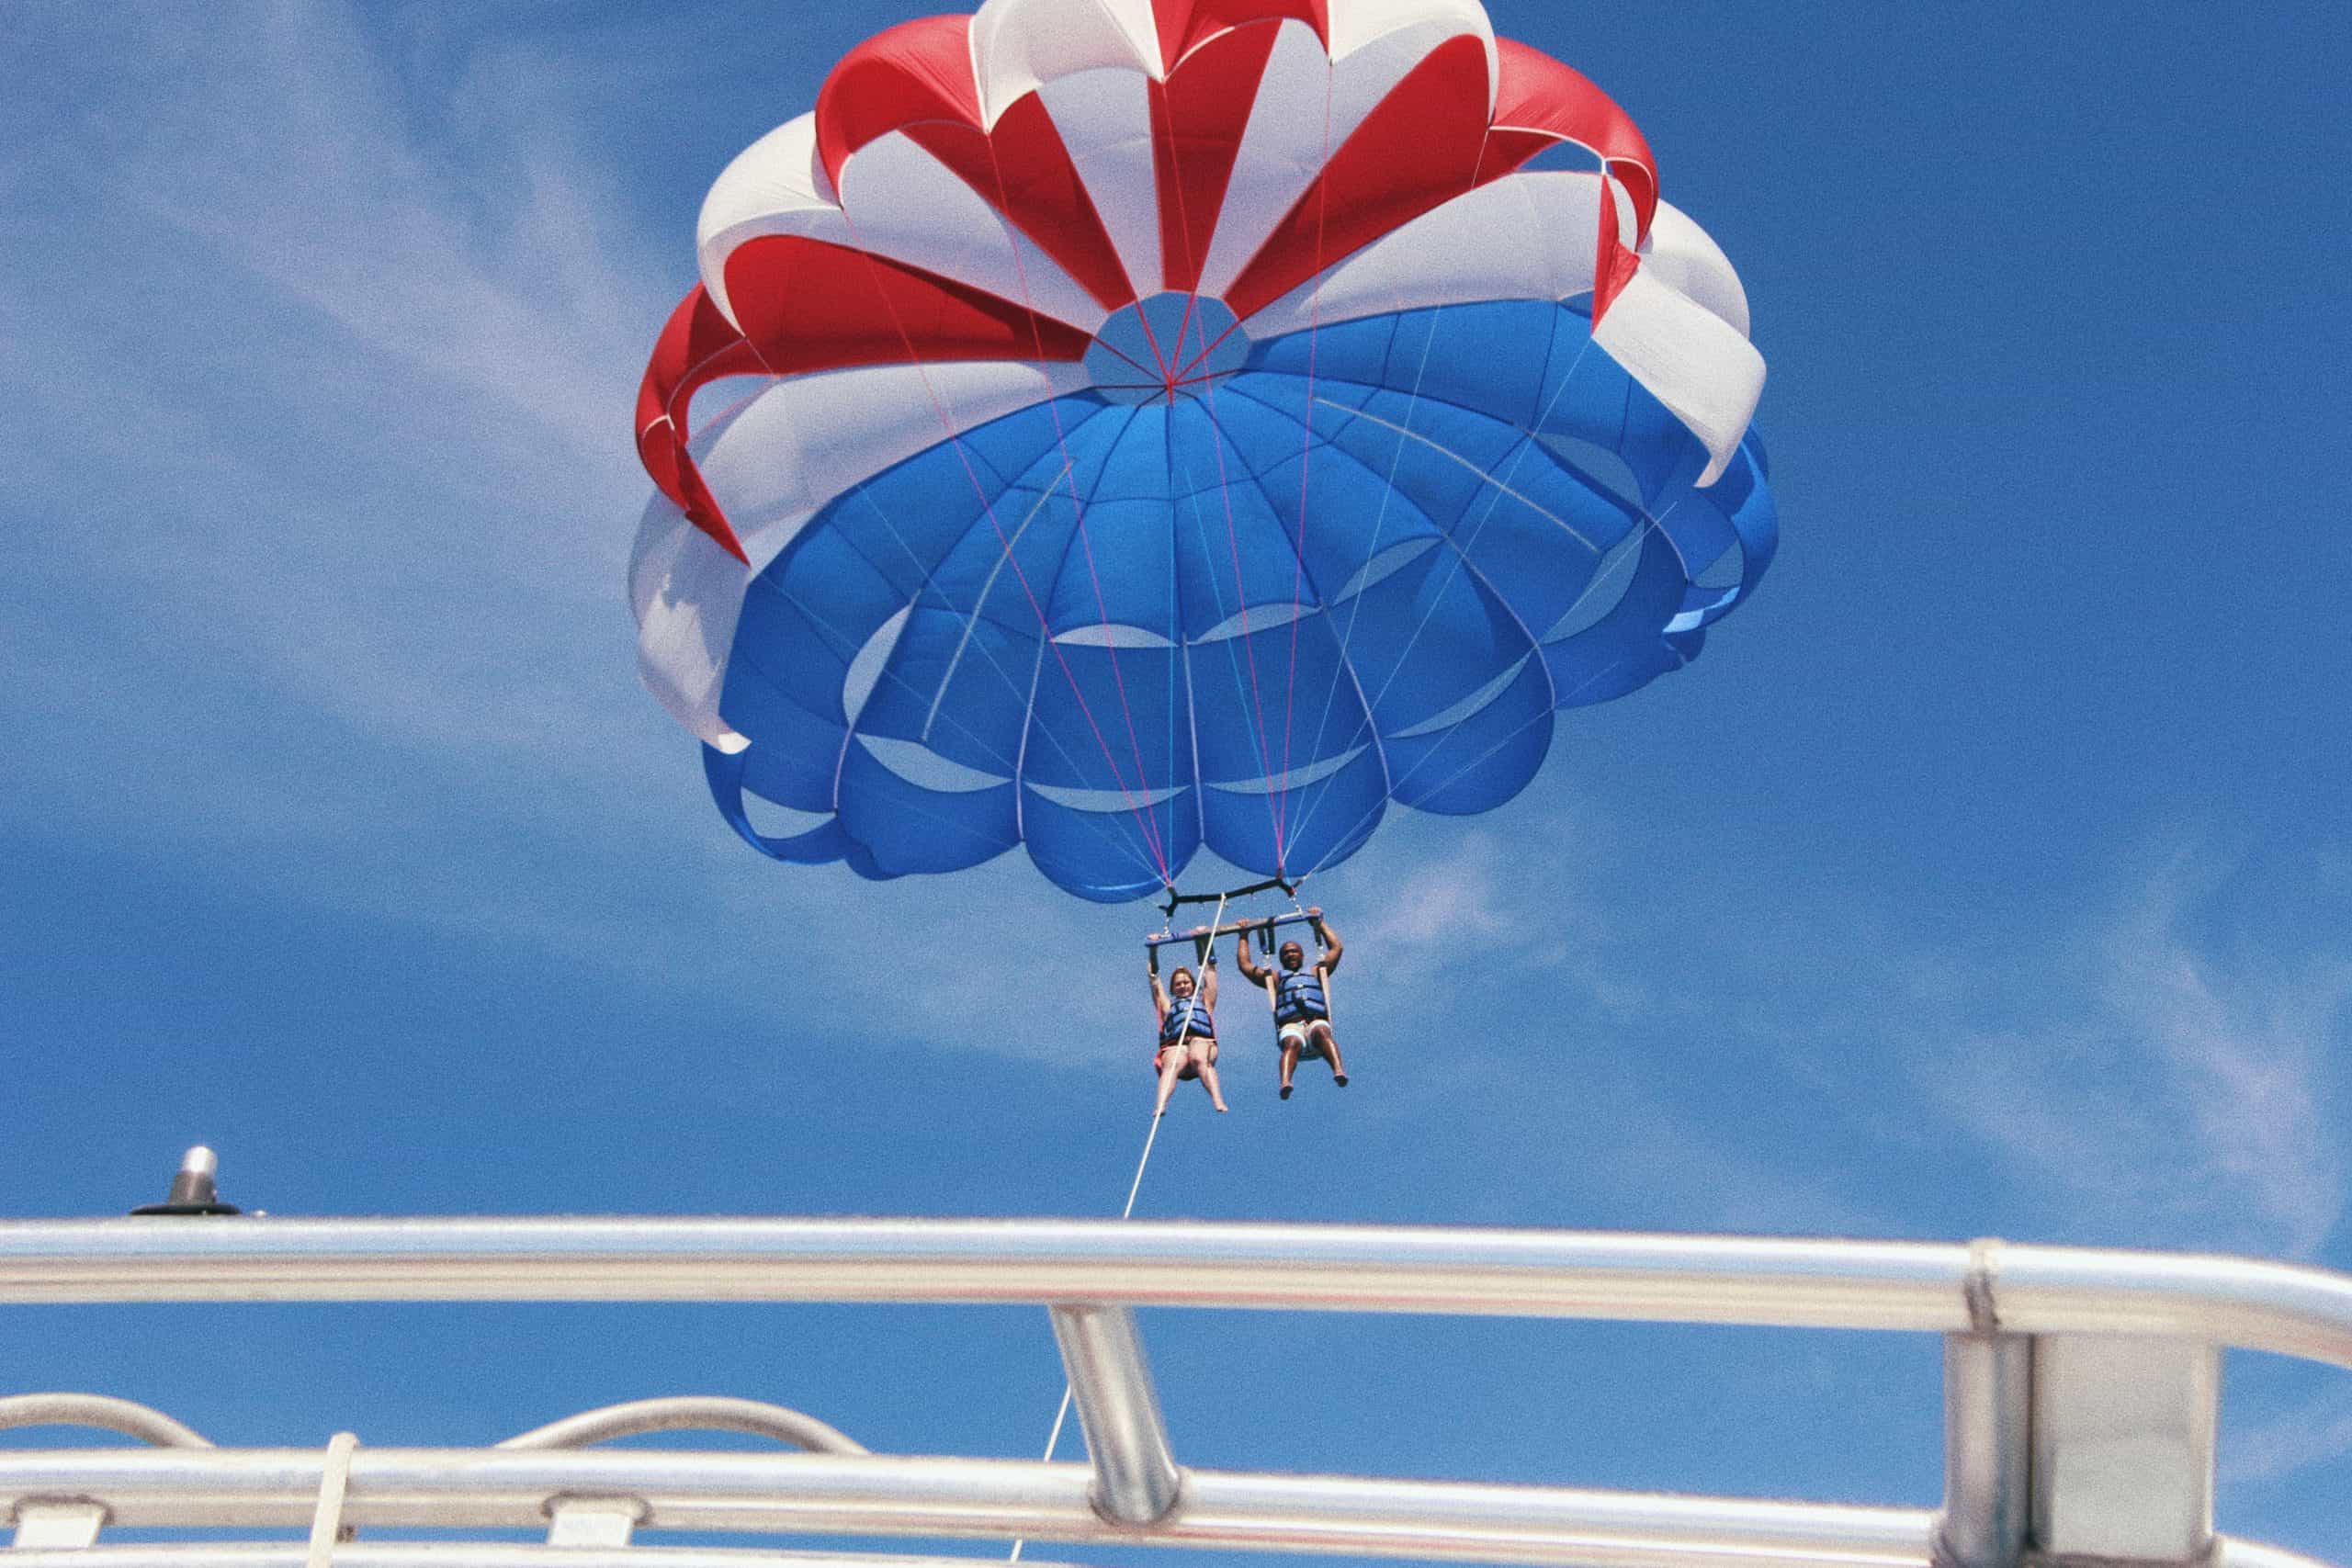 Parasailing, or extreme parachute flight behind a motorboat – what does it look like in practice?